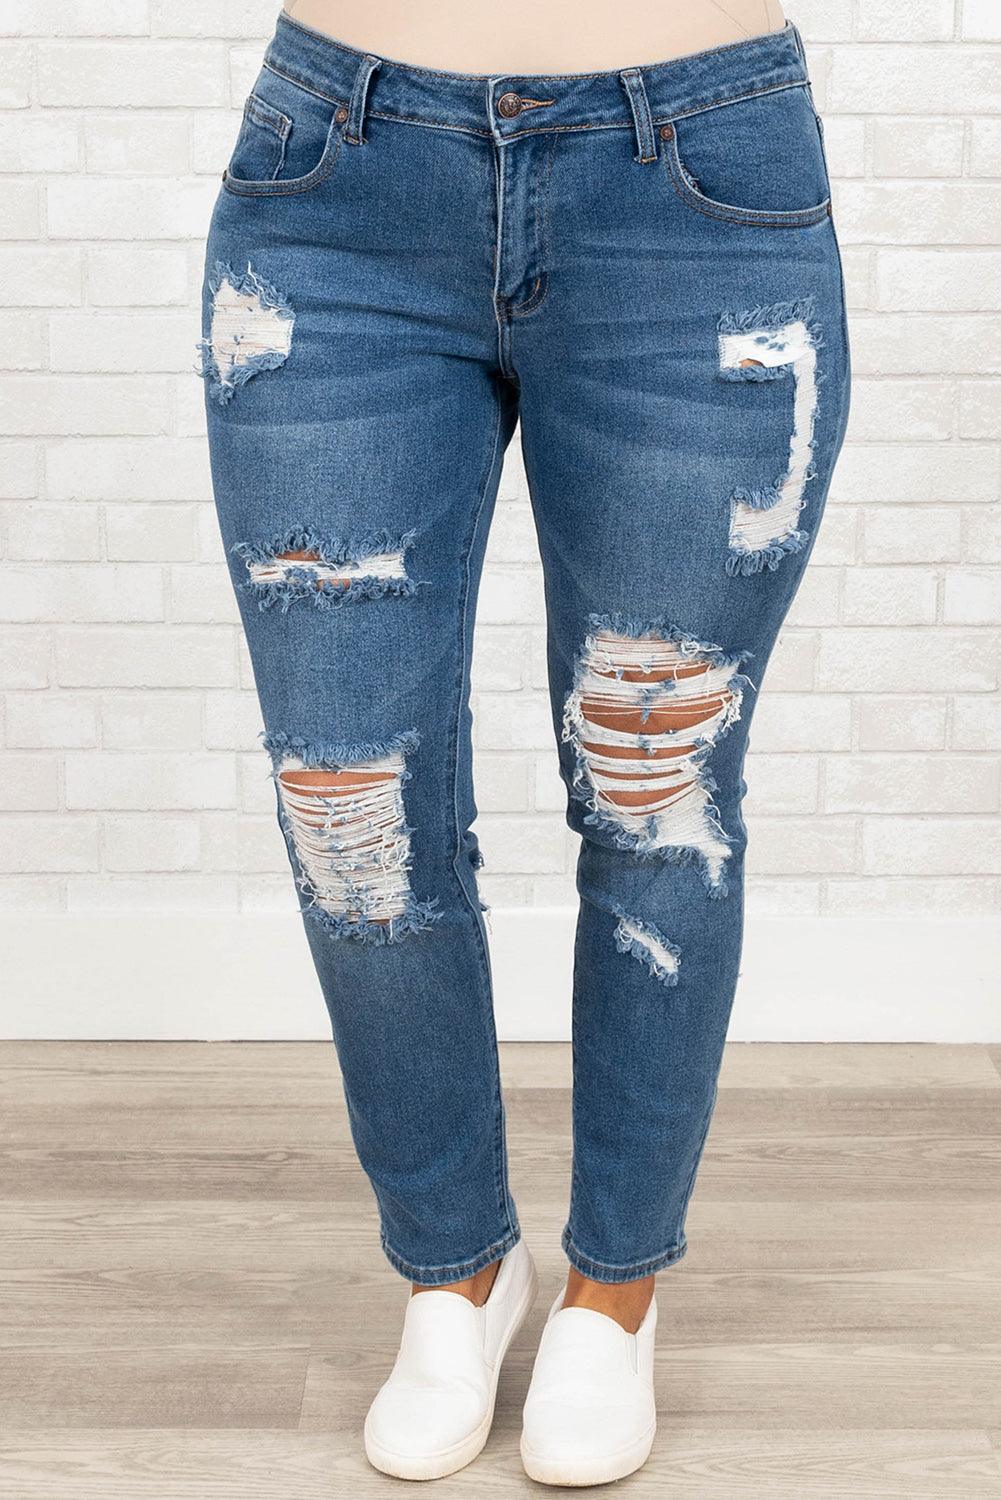 Plus Size Distressed Ripped Skinny Jeans